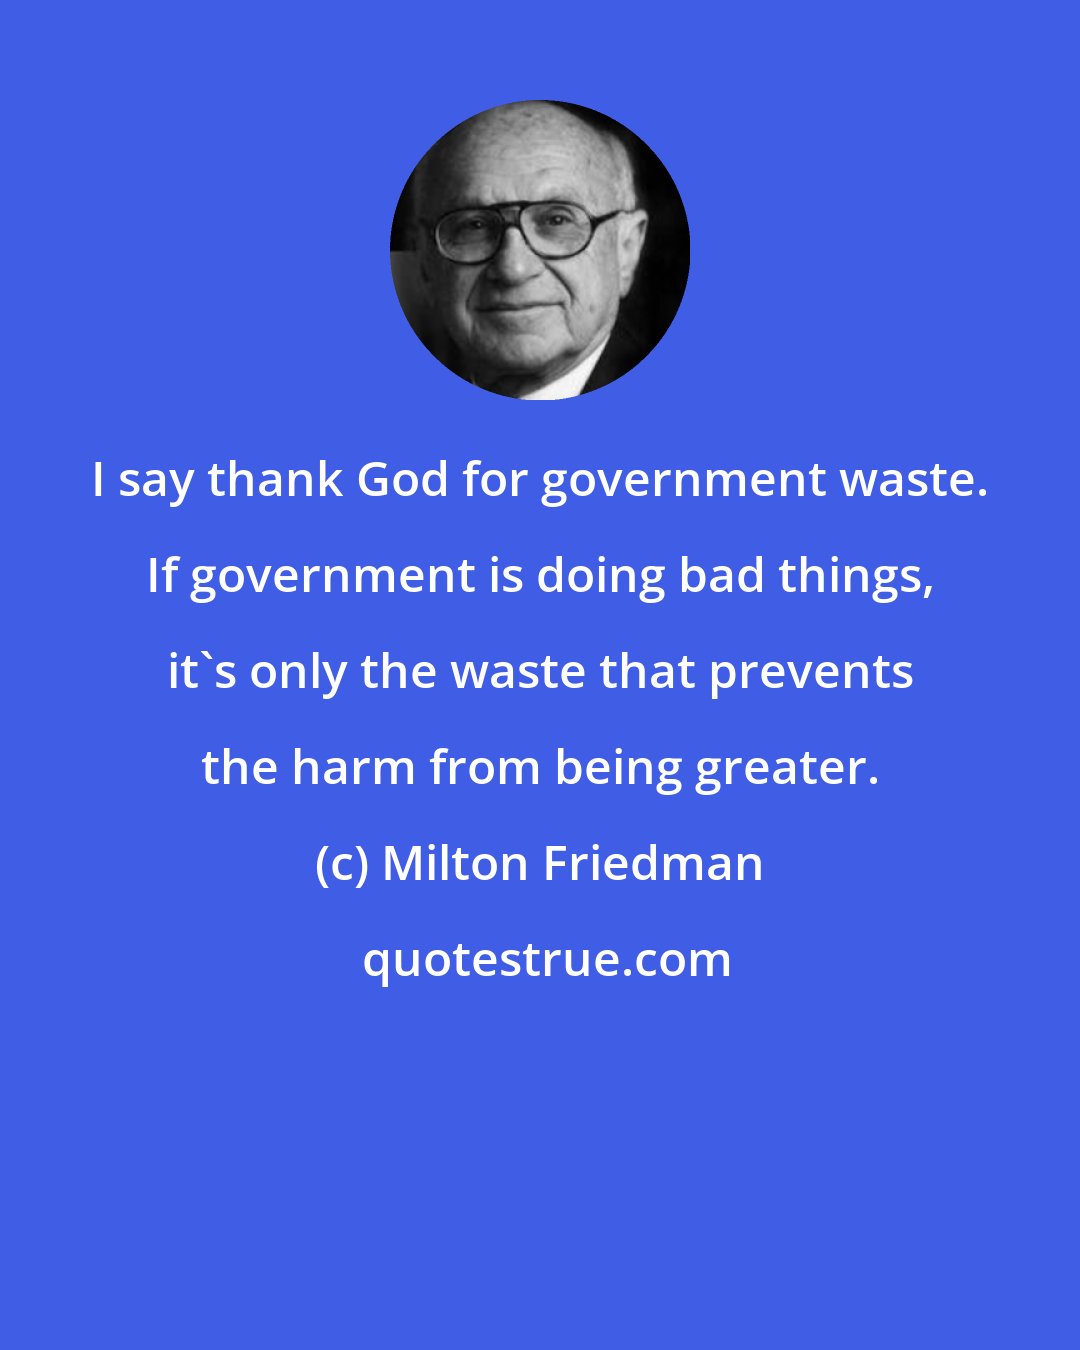 Milton Friedman: I say thank God for government waste. If government is doing bad things, it's only the waste that prevents the harm from being greater.